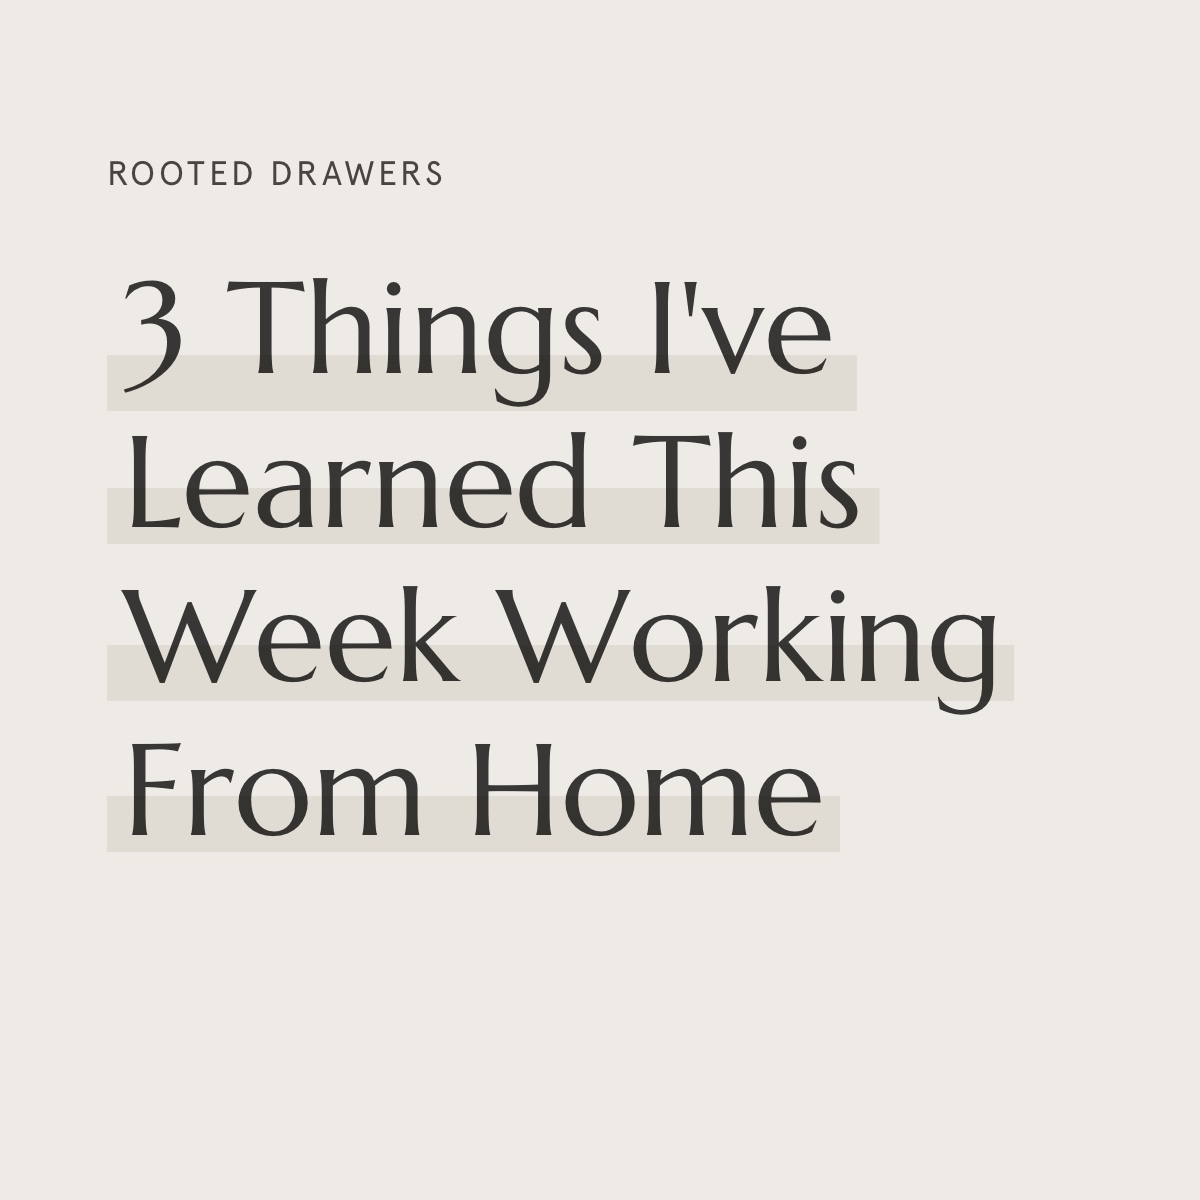 3 things I've learned this week